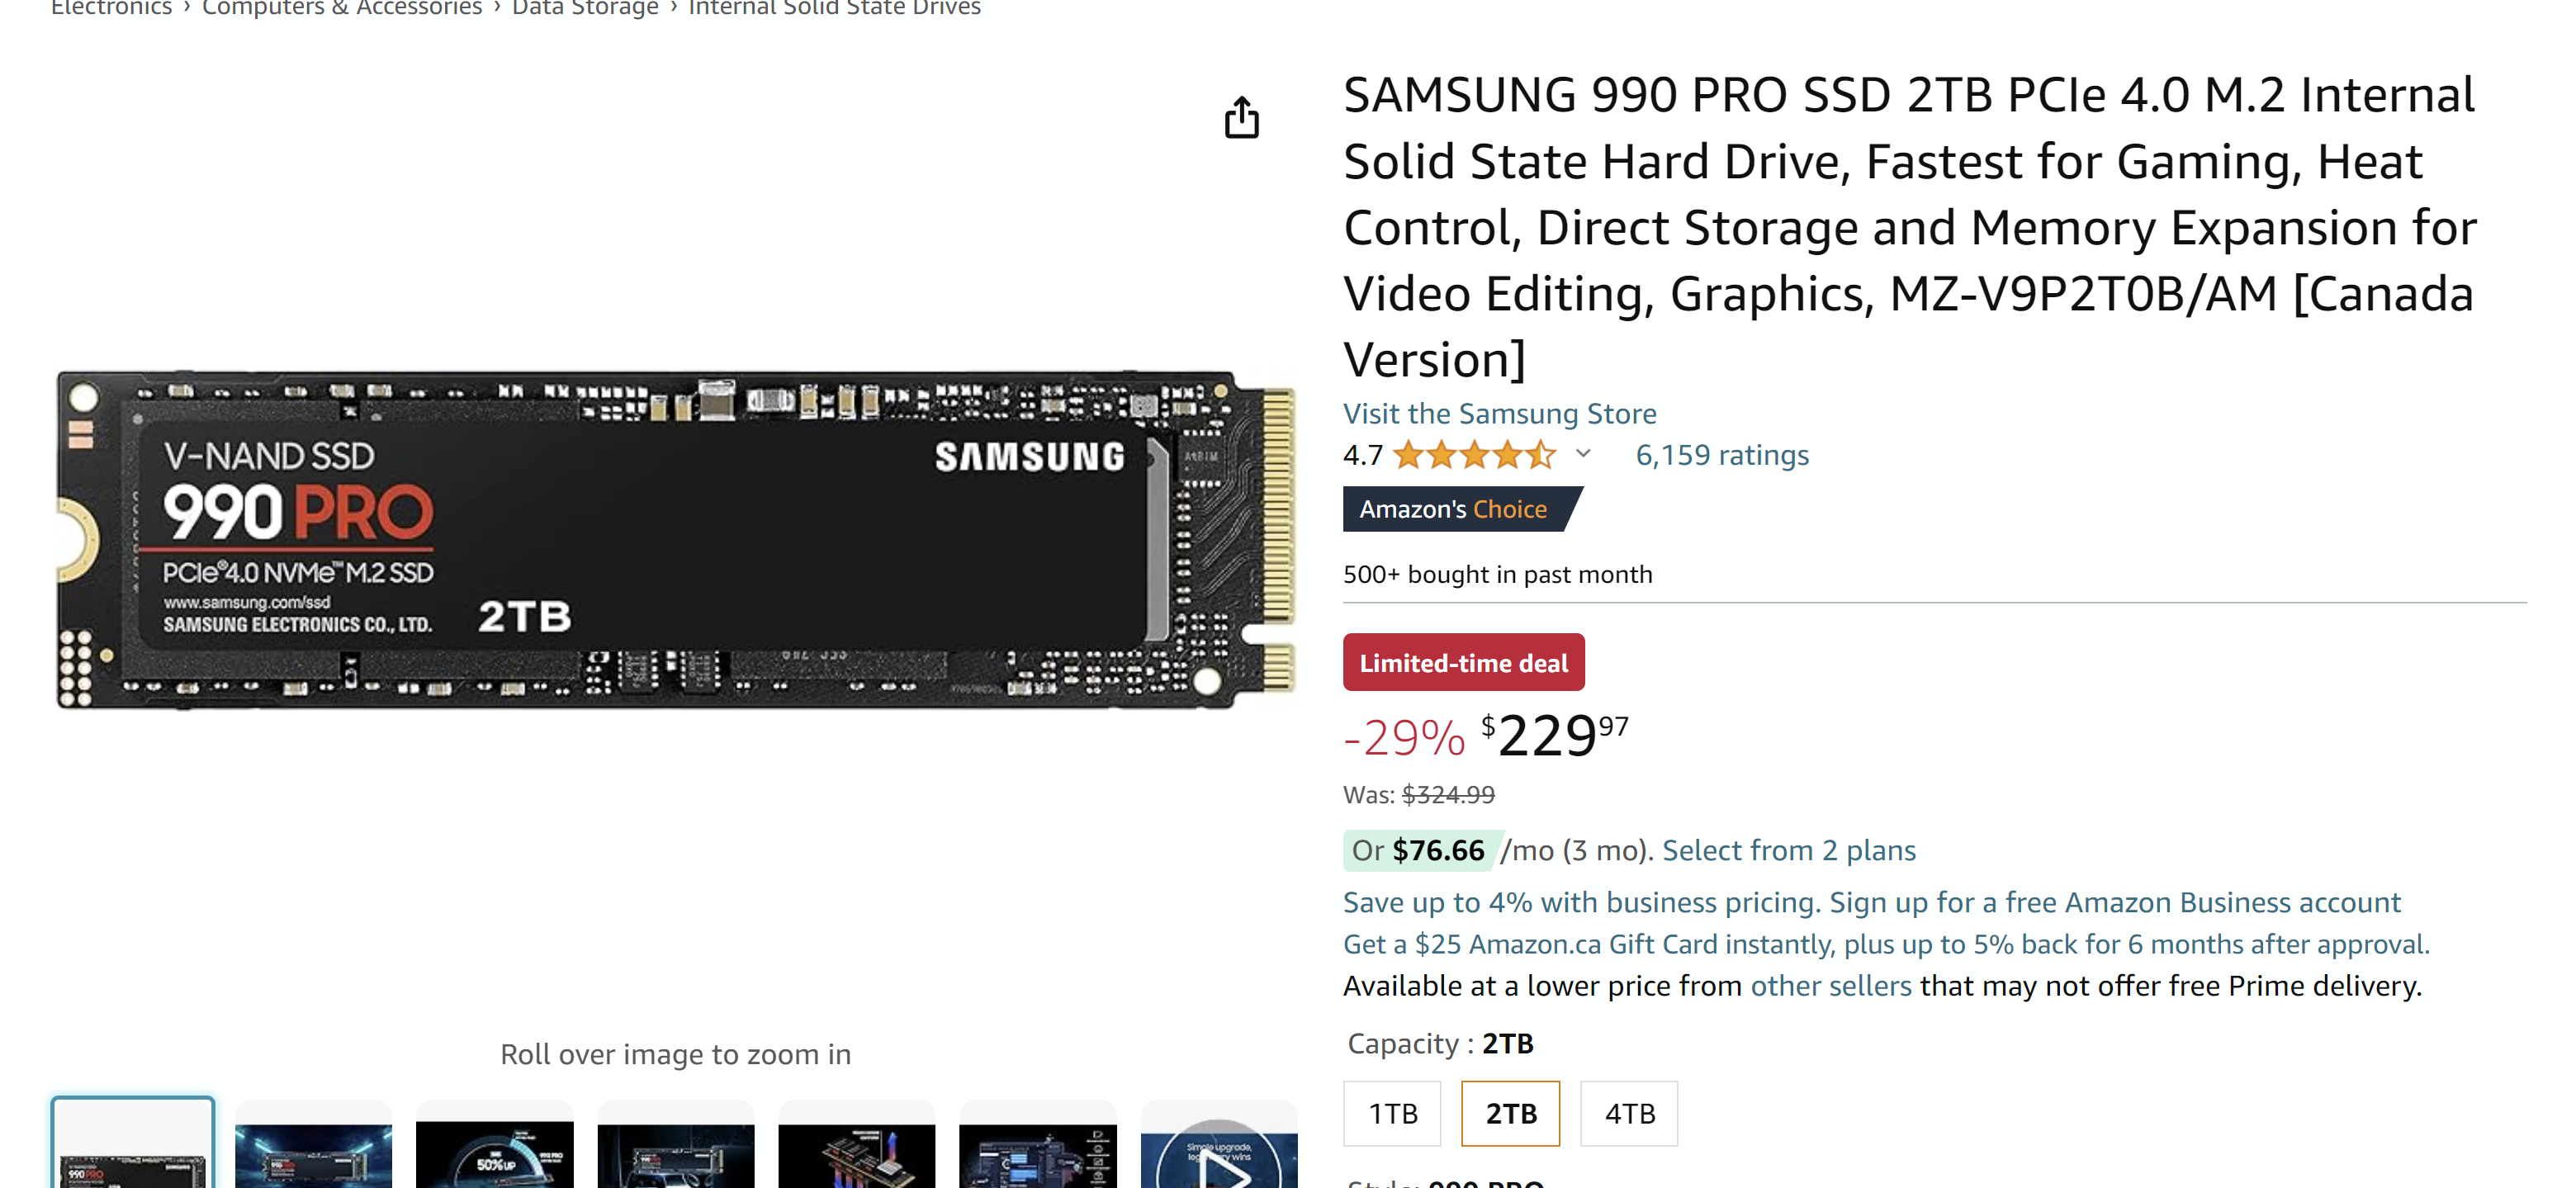 SAMSUNG 990 PRO SSD 2TB PCIe 4.0 M.2 Internal Solid State Hard Drive, Fastest for Gaming